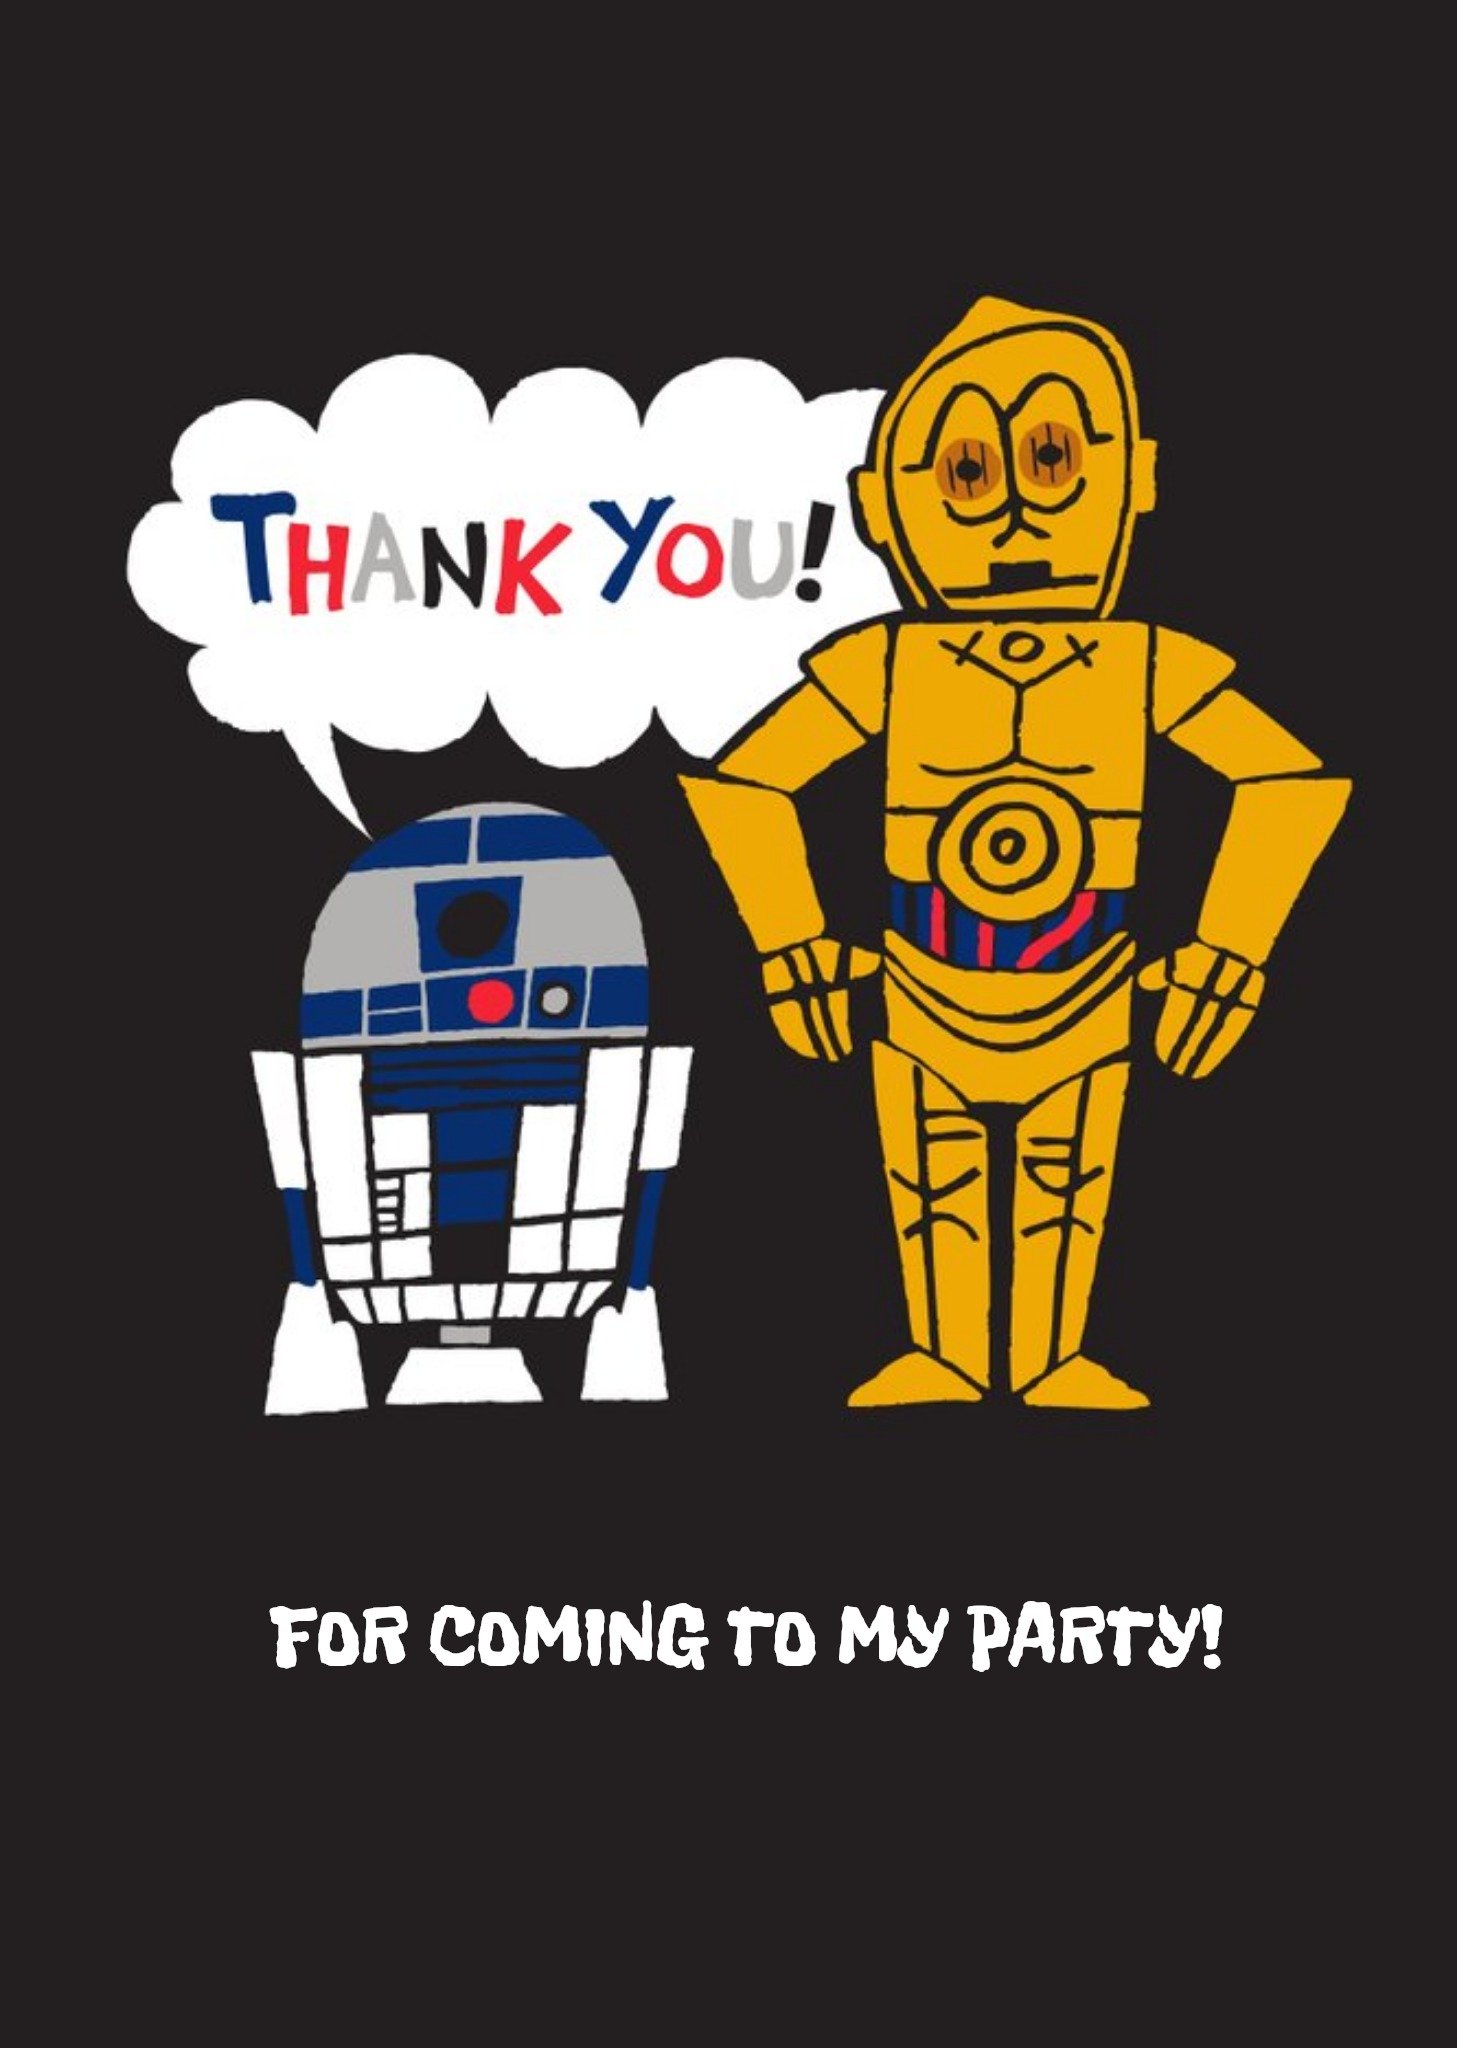 Disney Star Wars C3Po And R2D2 Cutouts Personalised Thank You Card Ecard